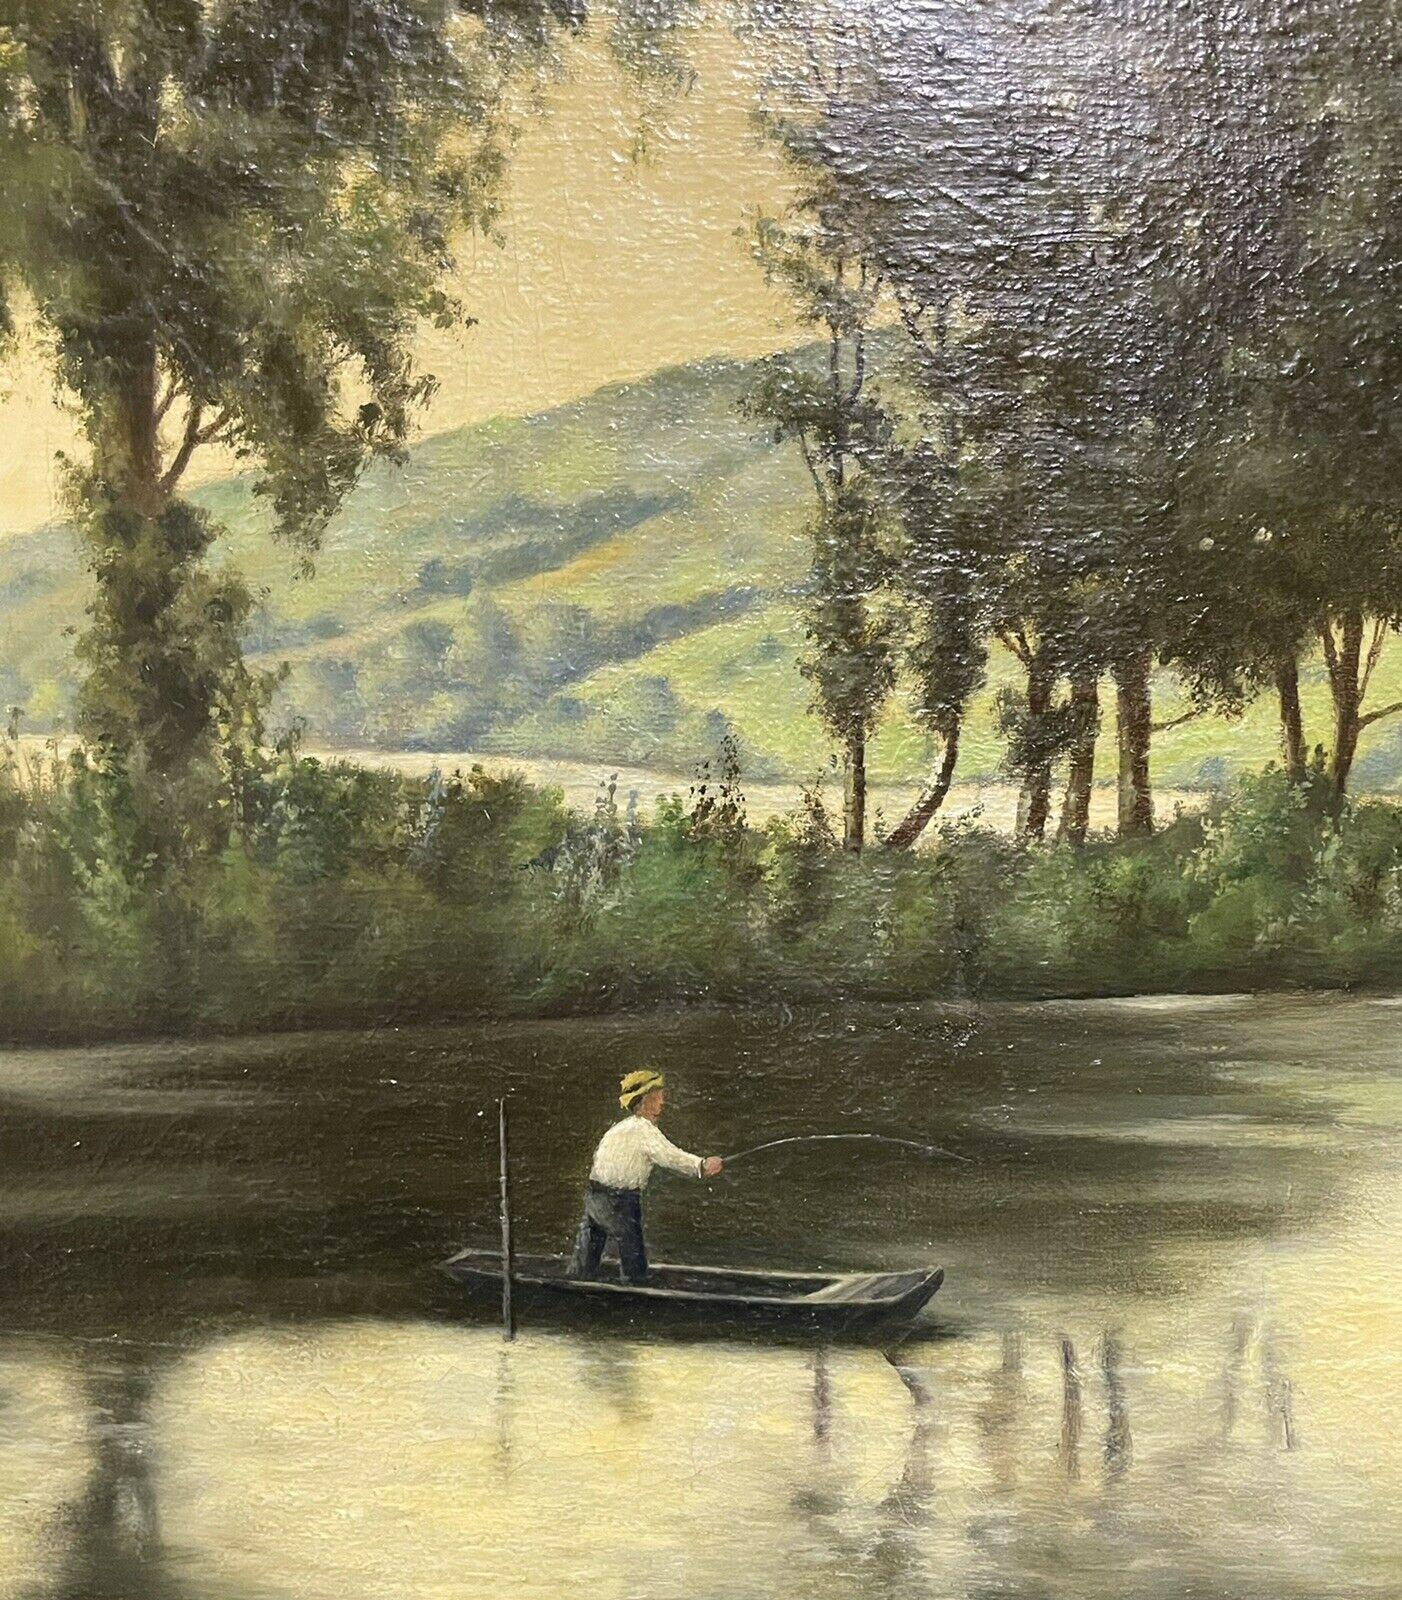 Artist/ School: French School, 20th century, signed

Title: The River Landscape

Medium: oil painting on canvas, framed

Size:     frame: 21.25 x 27 inches 
          painting: 18 x 24 inches

Provenance: Provence, France

Condition: The painting is